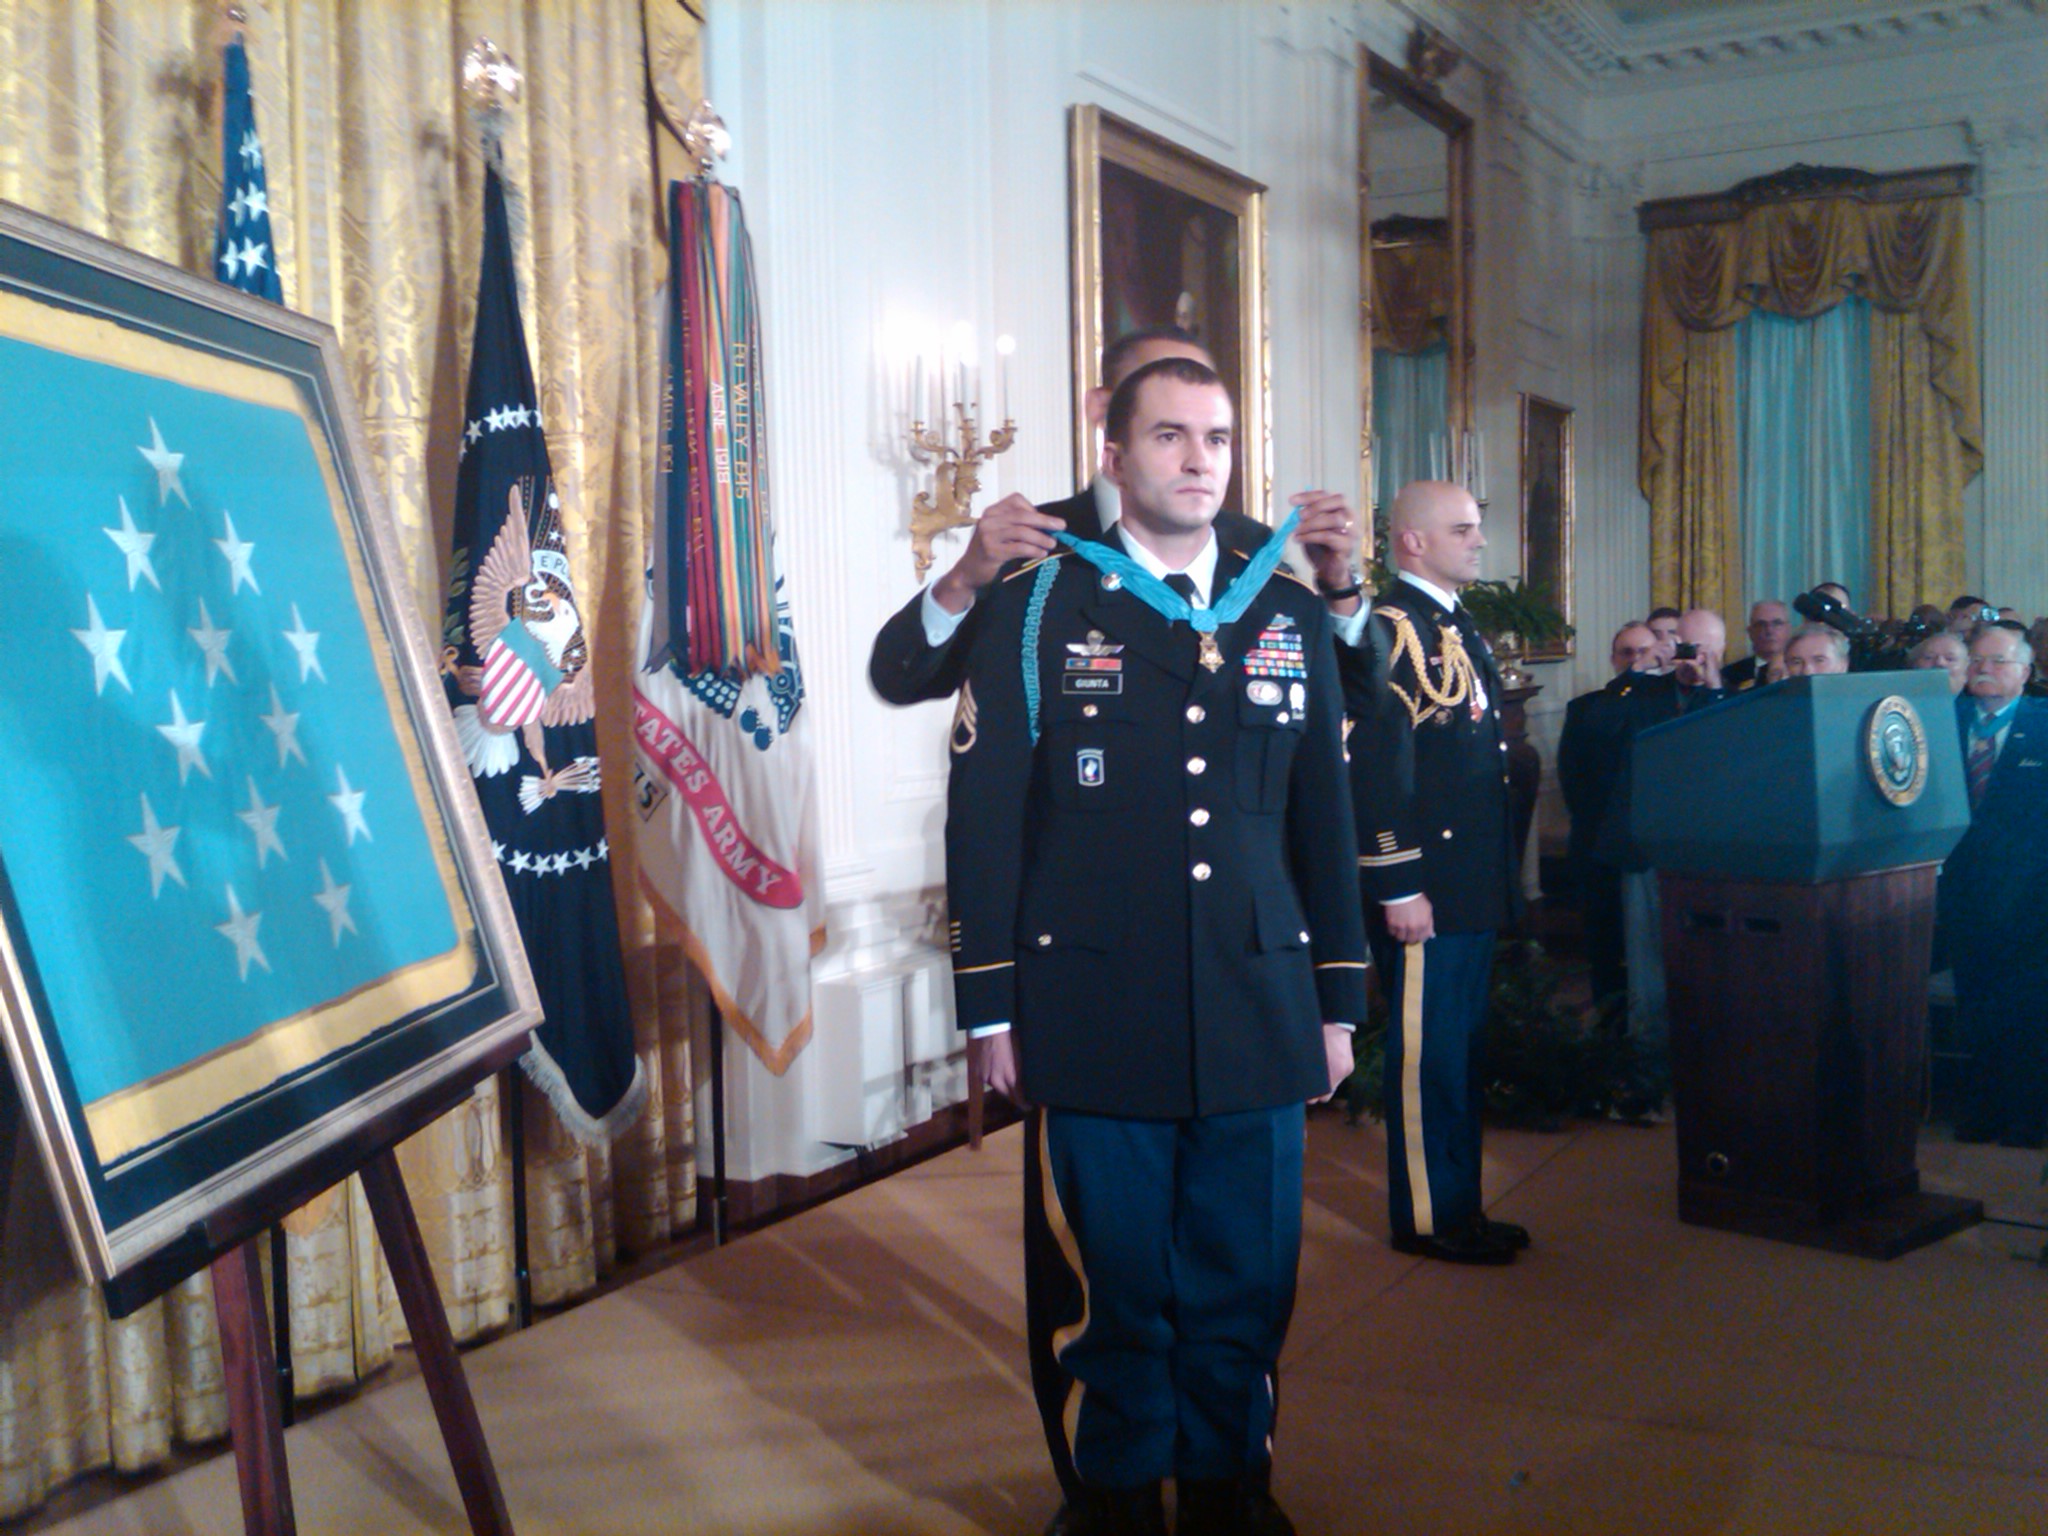 Medal of Honor Ceremony for Staff Sgt. Giunta